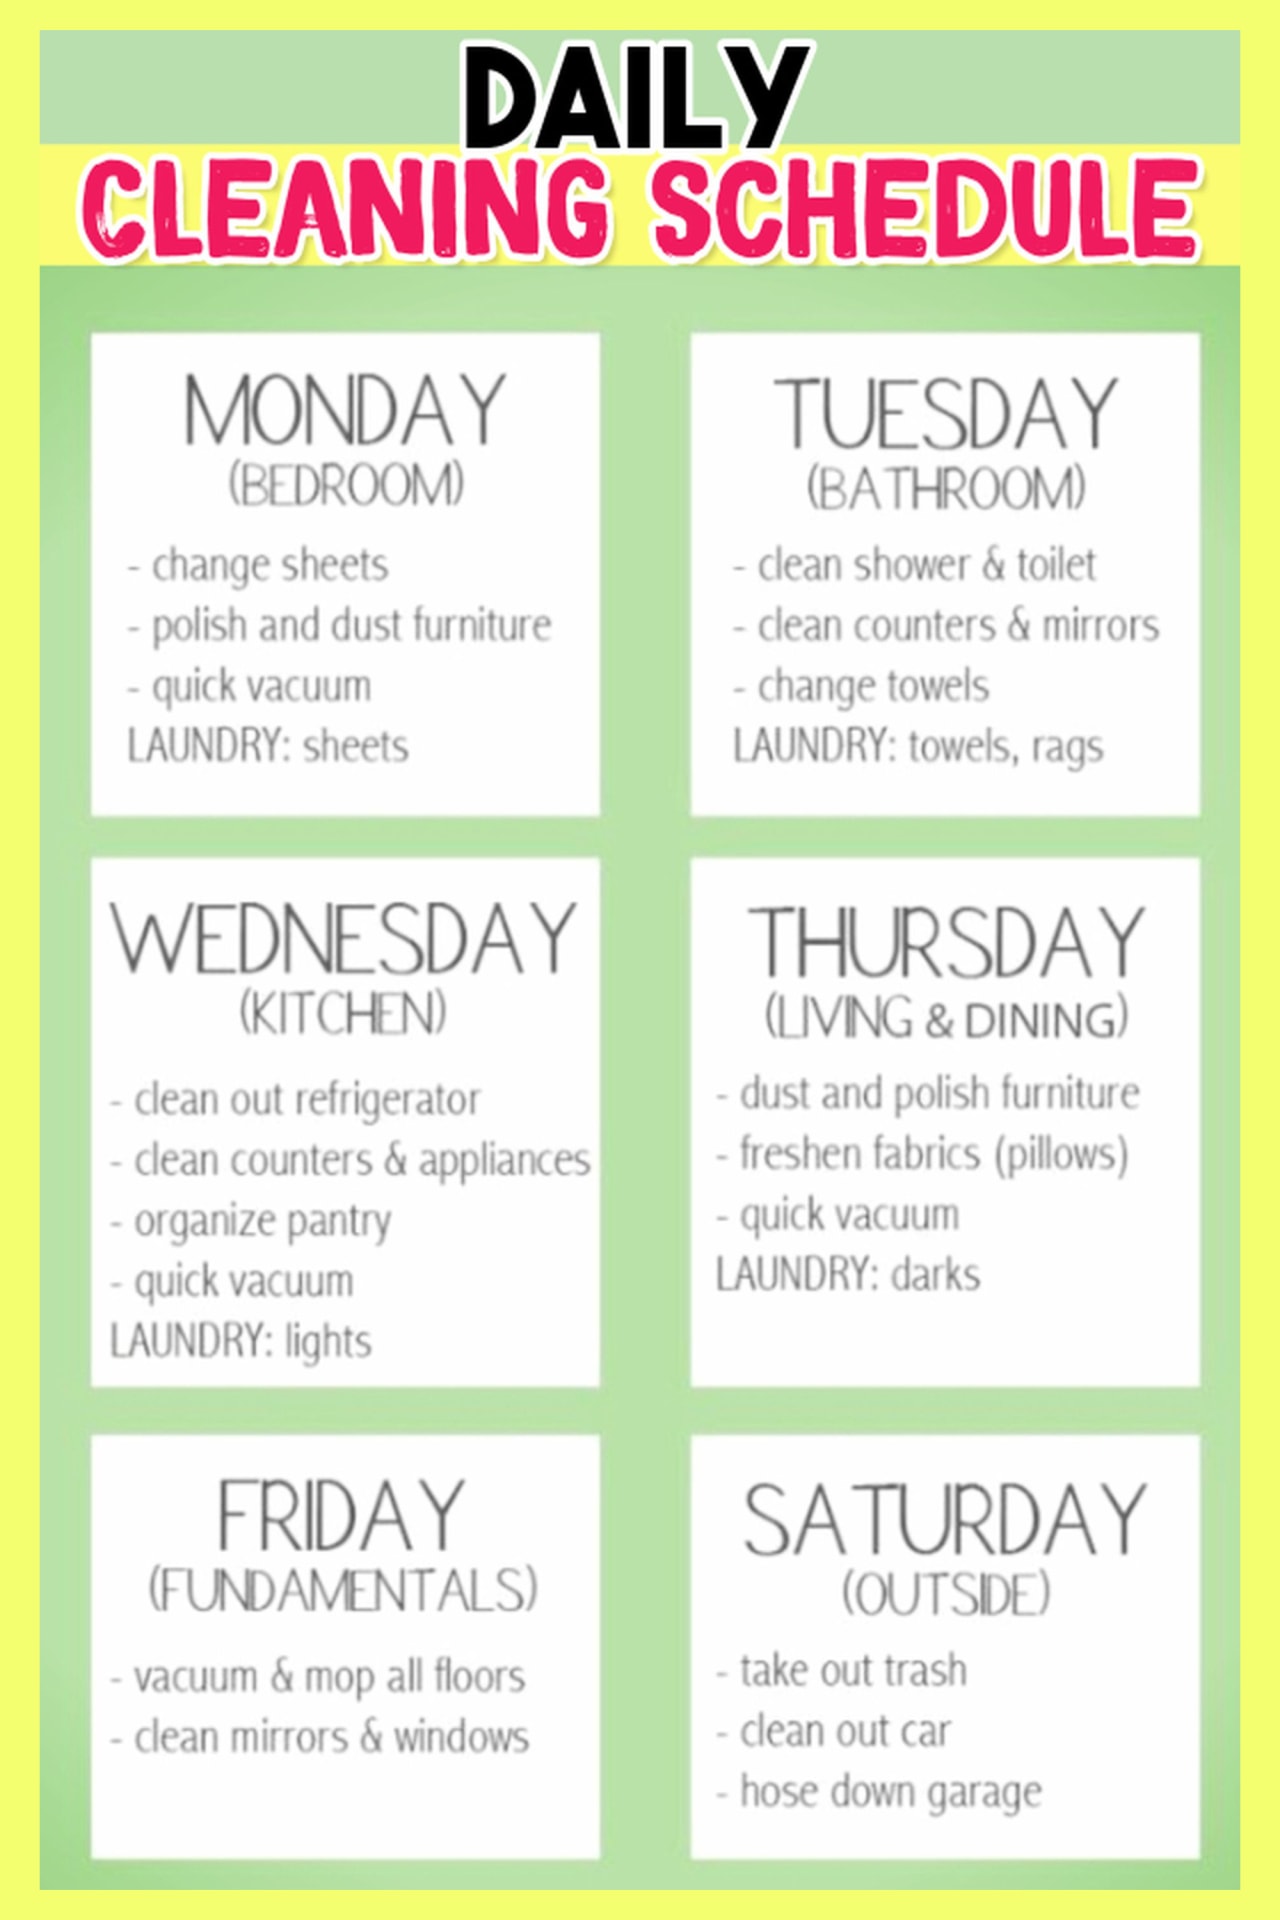 Daily house cleaning schedule - This daily cleaning checklist chart will help you stop feeling overwhelmed by clutter and your messy house and keep your house neat, clean and organized